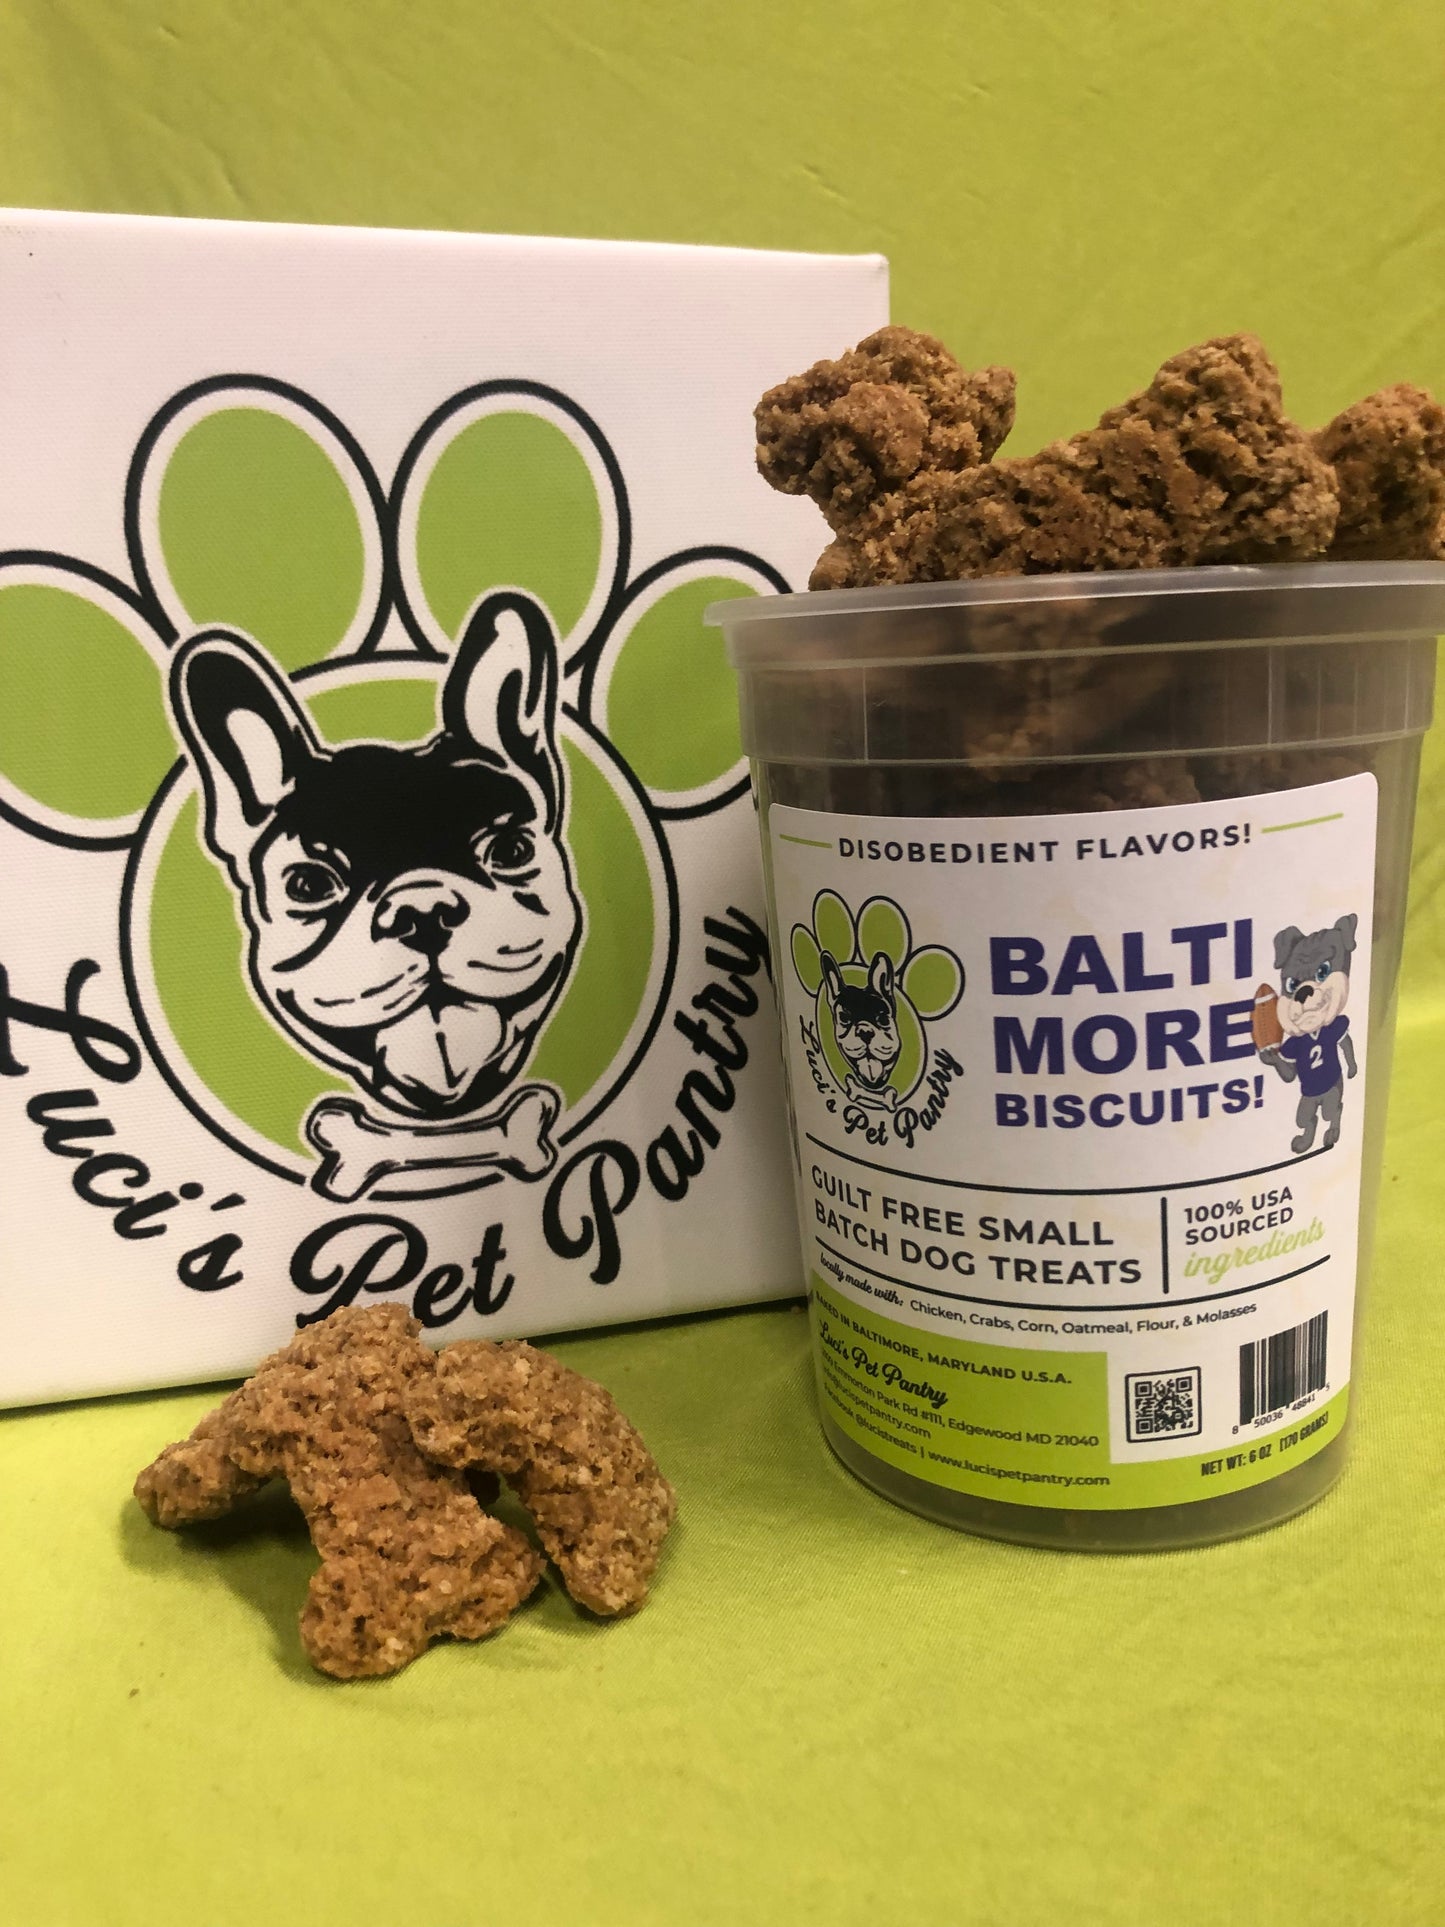 Baltimore Biscuits - All Natural "Chicken, Crab, & Corn" Dog & Puppy Treats - Disobedient Tub of Biscuits